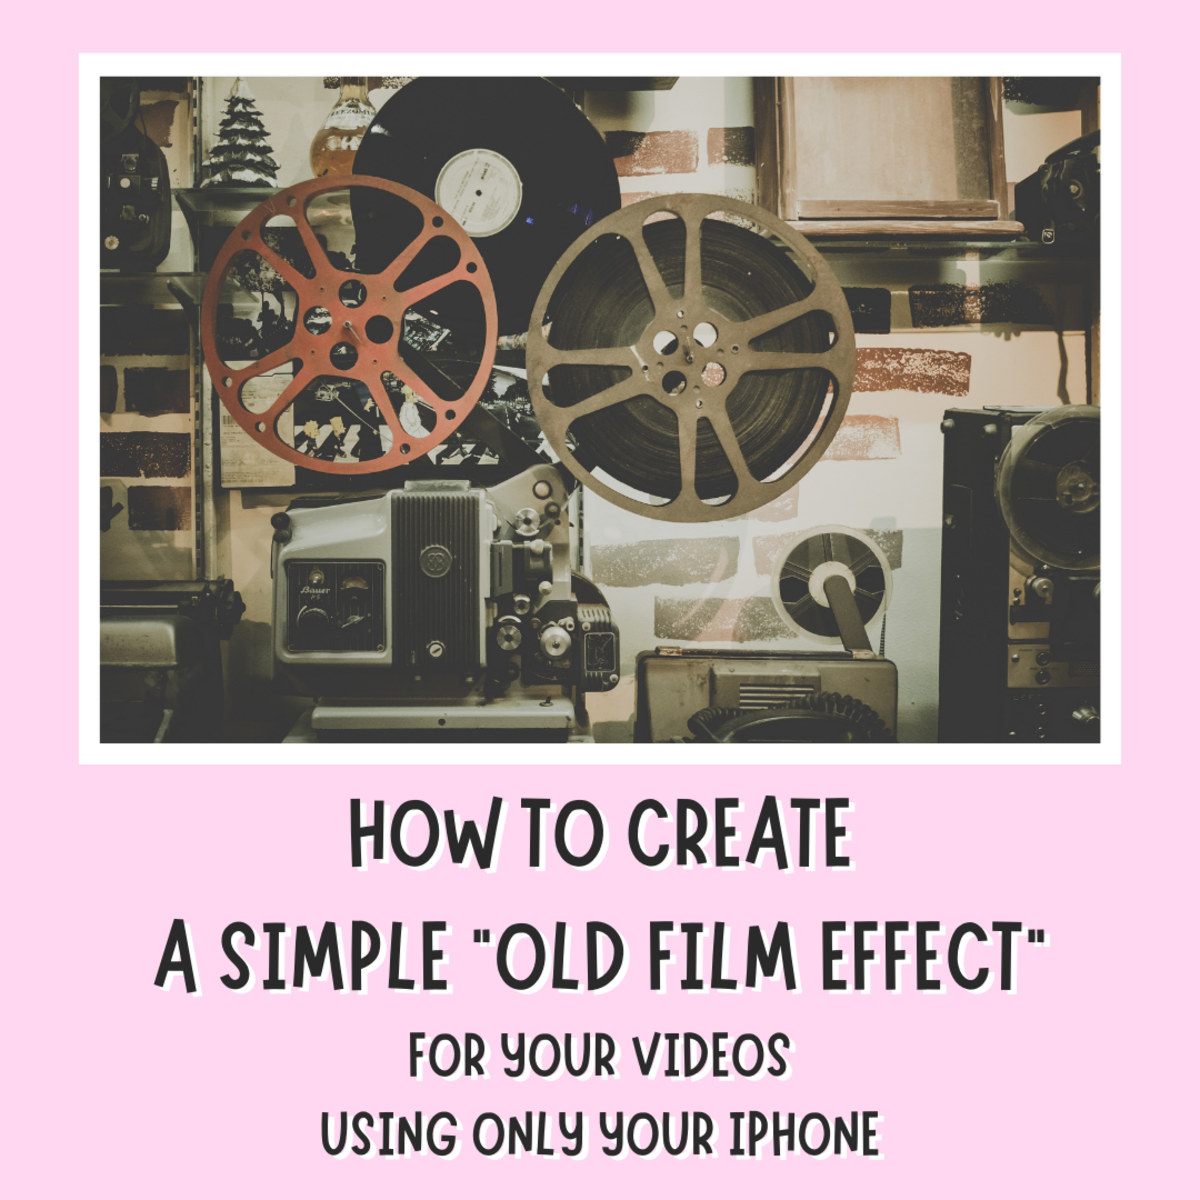 Create a Simple Old Film Effect When Editing Videos on iPhone